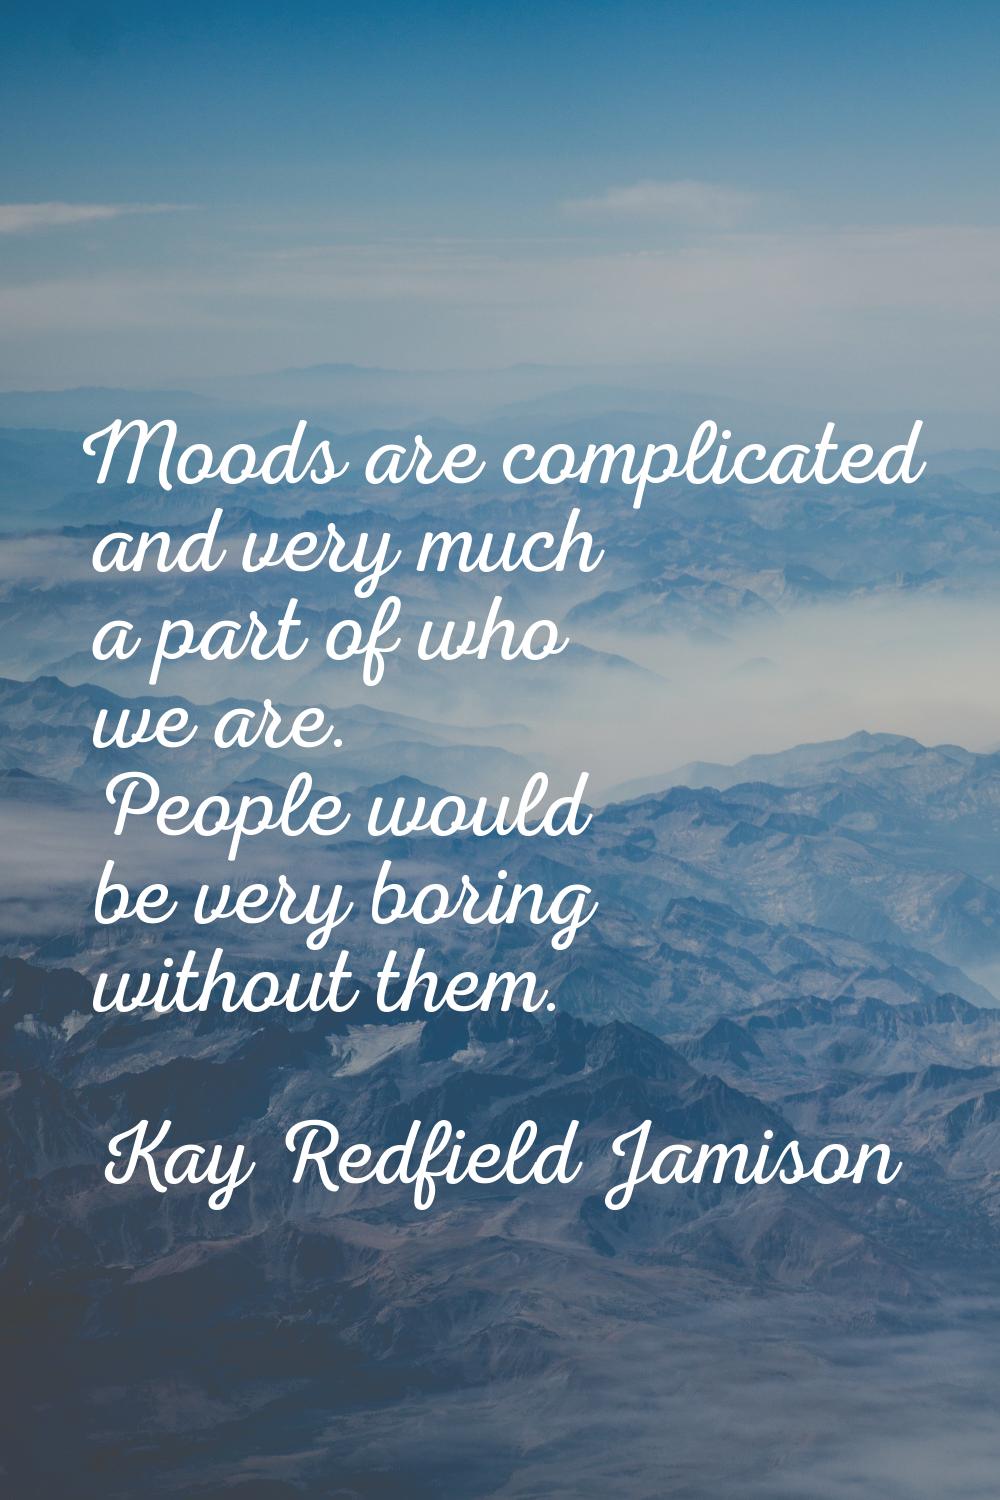 Moods are complicated and very much a part of who we are. People would be very boring without them.